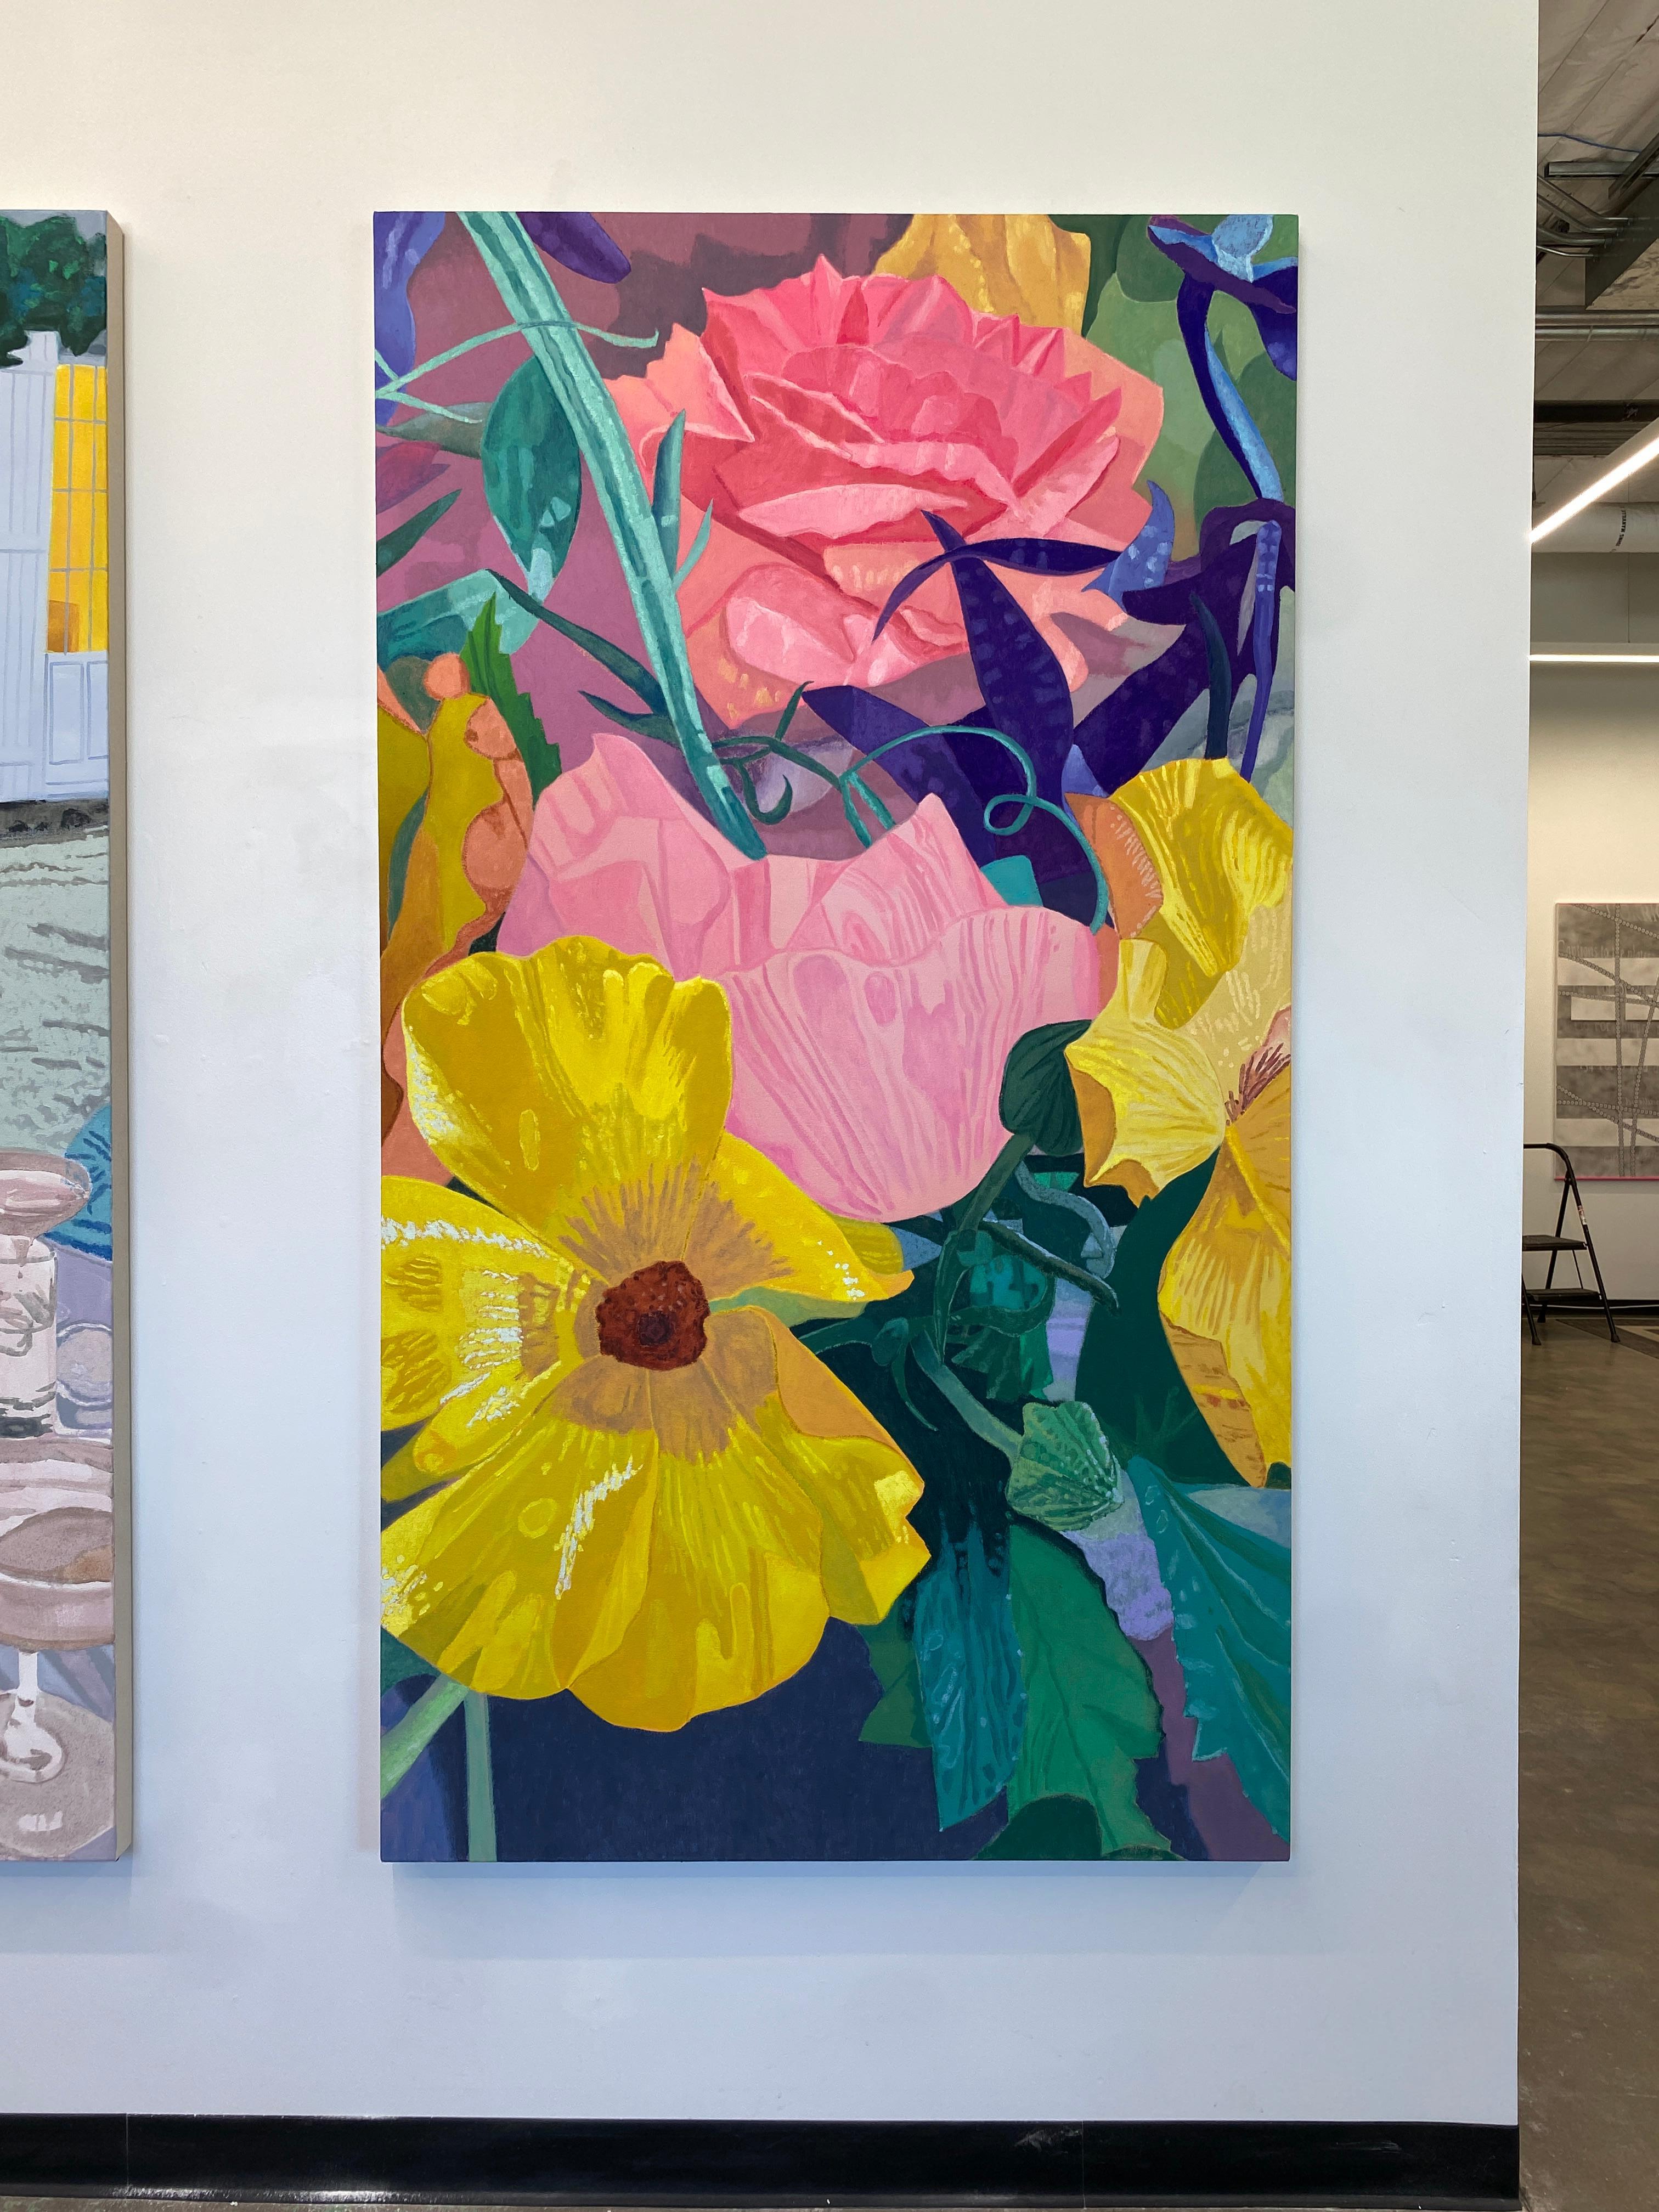 Party Frog is a featured work in Bradley Kerl's solo exhibition, To Speak Through Flowers, at Ivester Contemporary. 

“To speak through flowers” is a German idiom that means to communicate in a roundabout way through symbols, codes or figures of